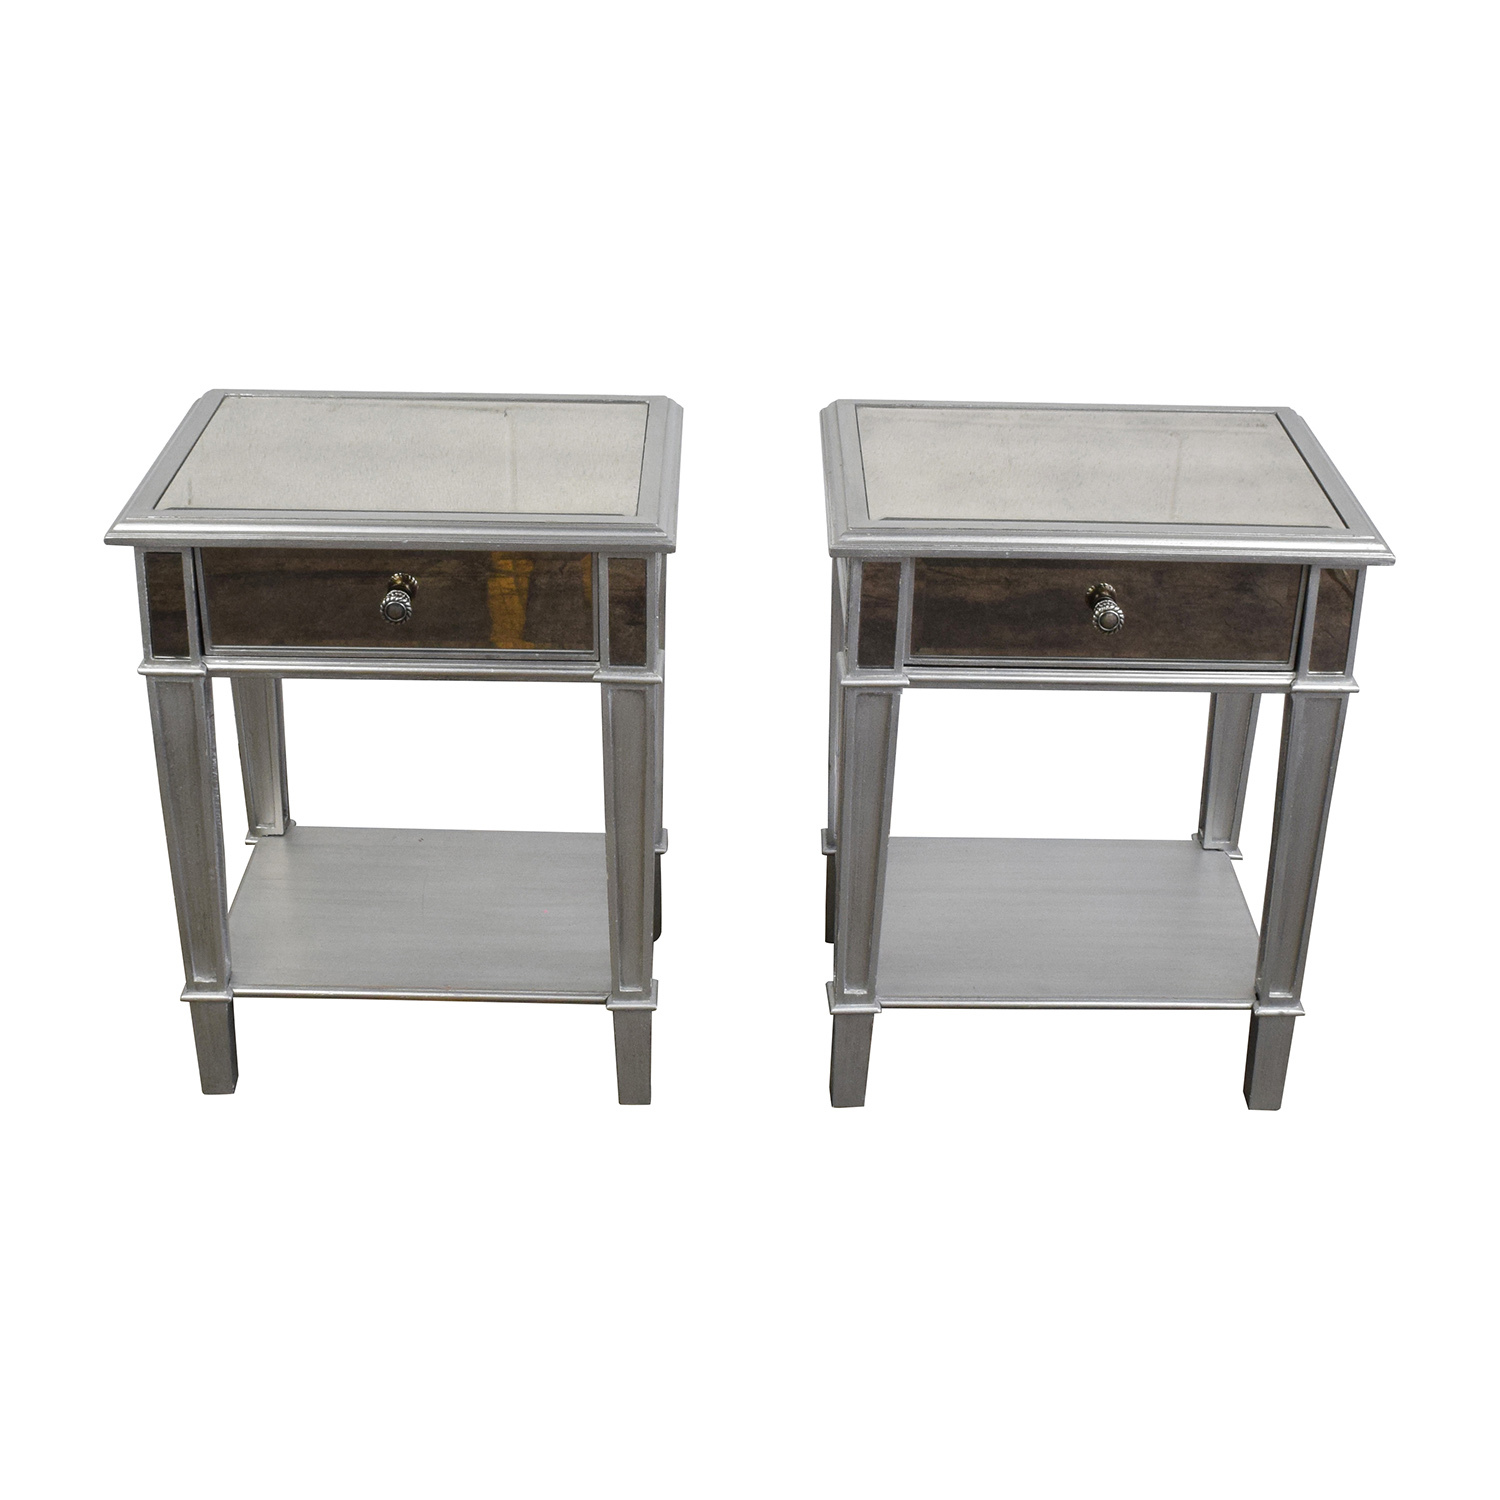 off pier hayward mirrored nightstands tables used accent table little coffee upcycled outdoor storage containers ikea base transition trim tall skinny side willow furniture lamps